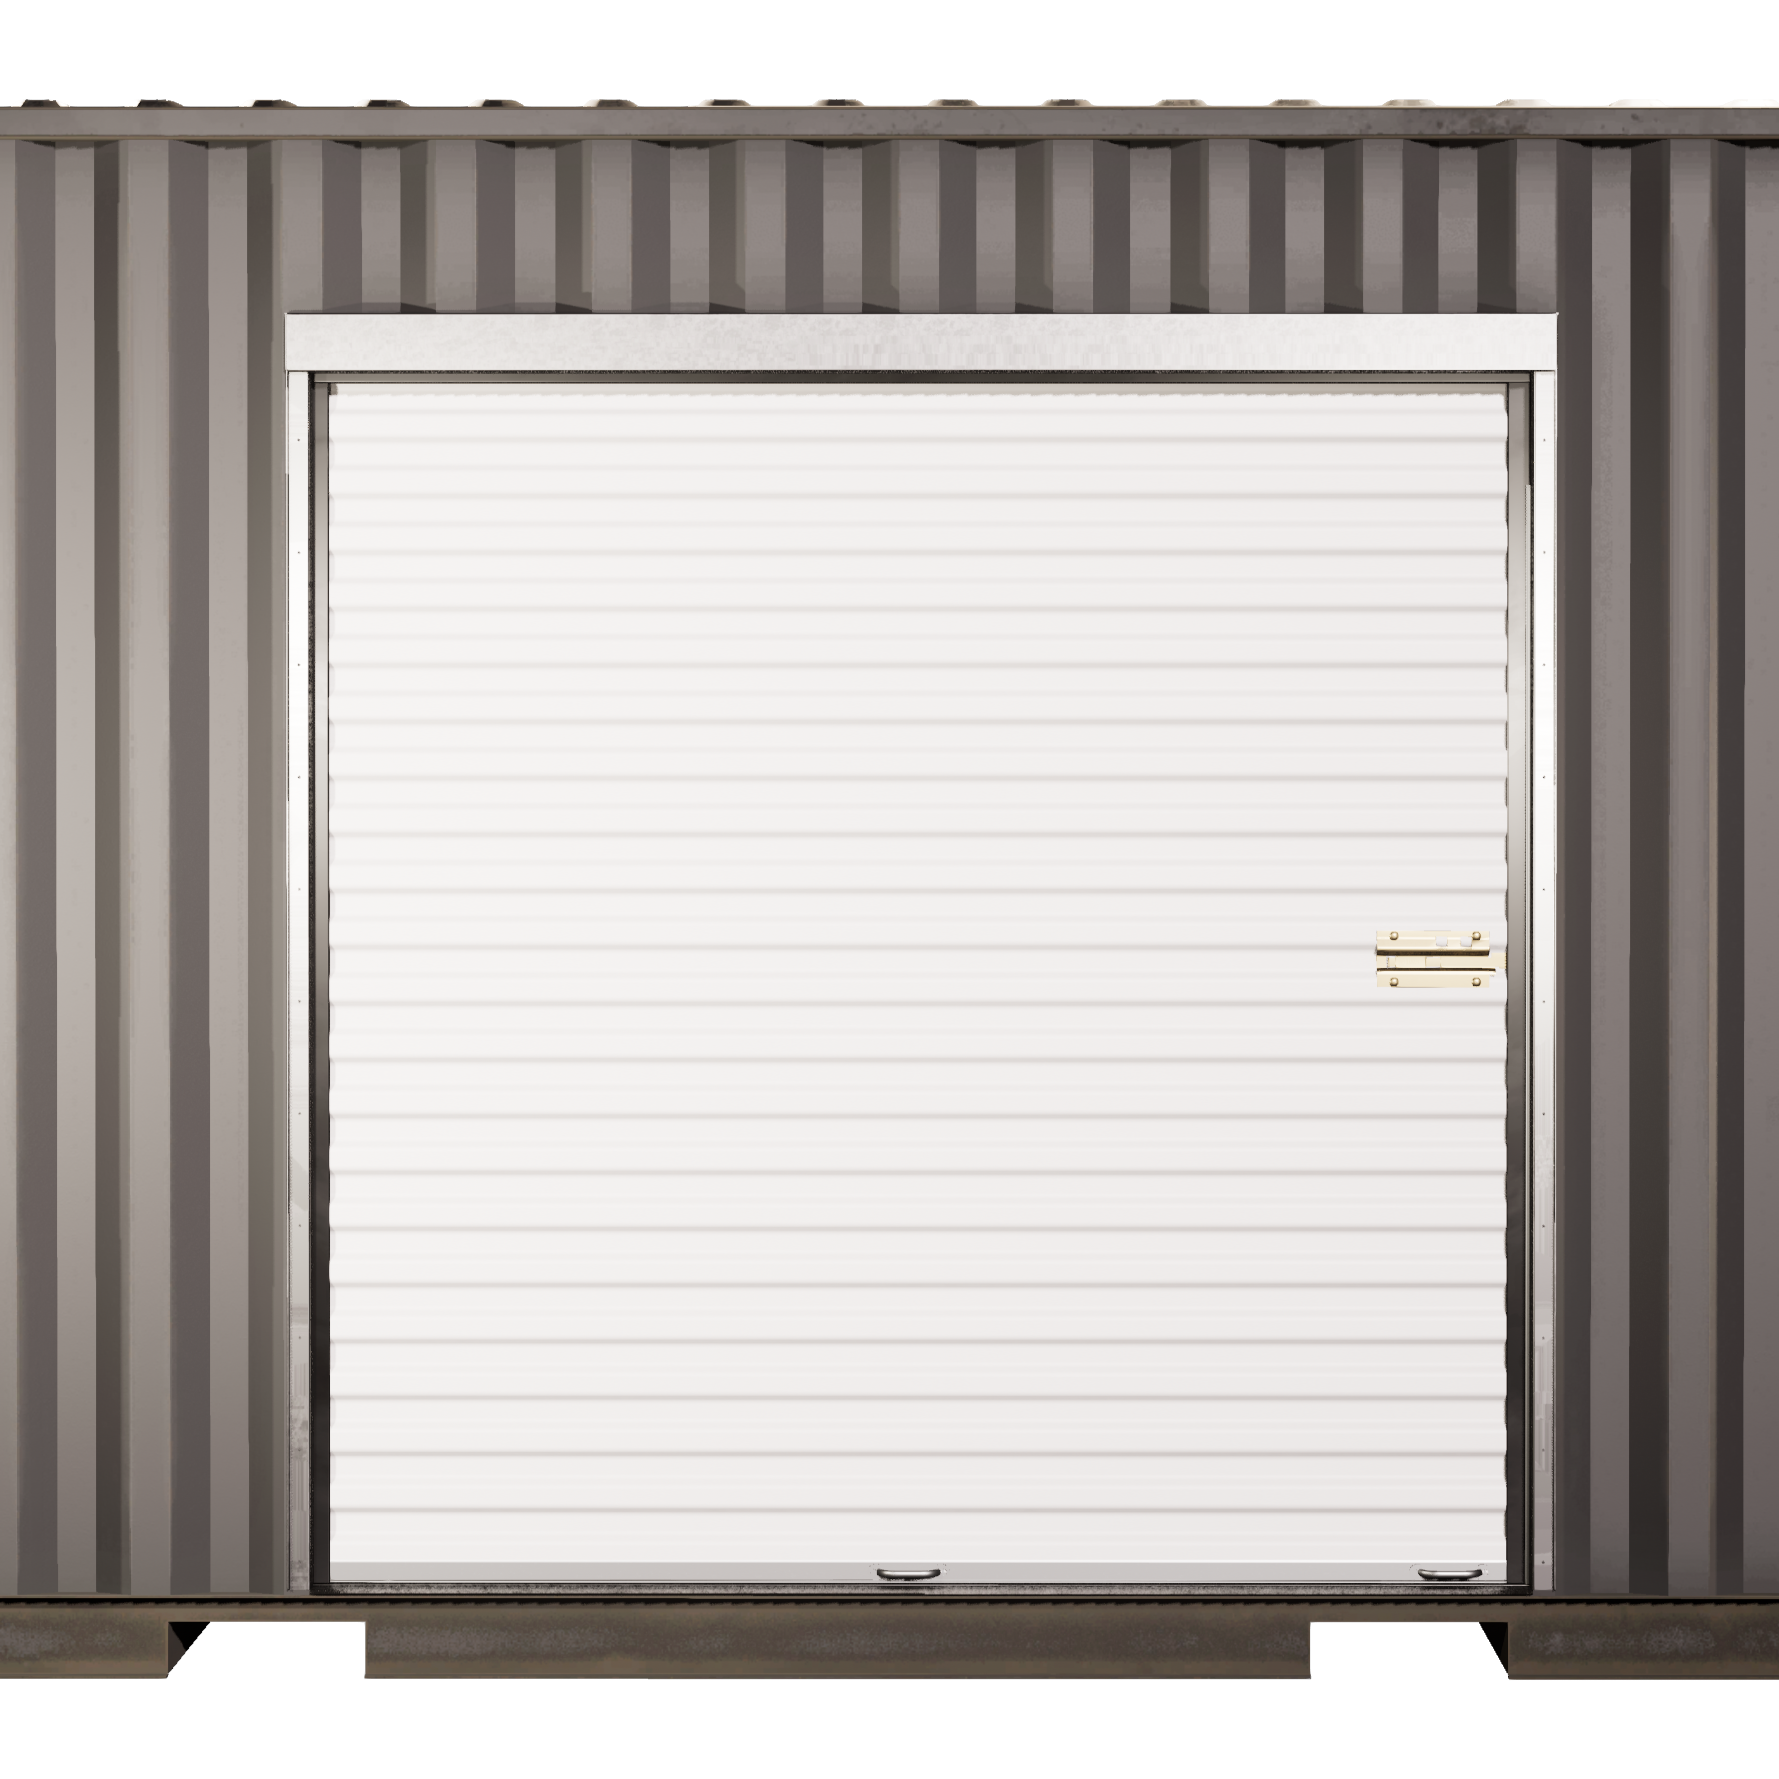 High Cube Container Size (9'6" Tall Container) Side Wall Roll Up Door Framing Kits - Door Not Included (Please contact us before placing order so we can provide accurate shipping quote)